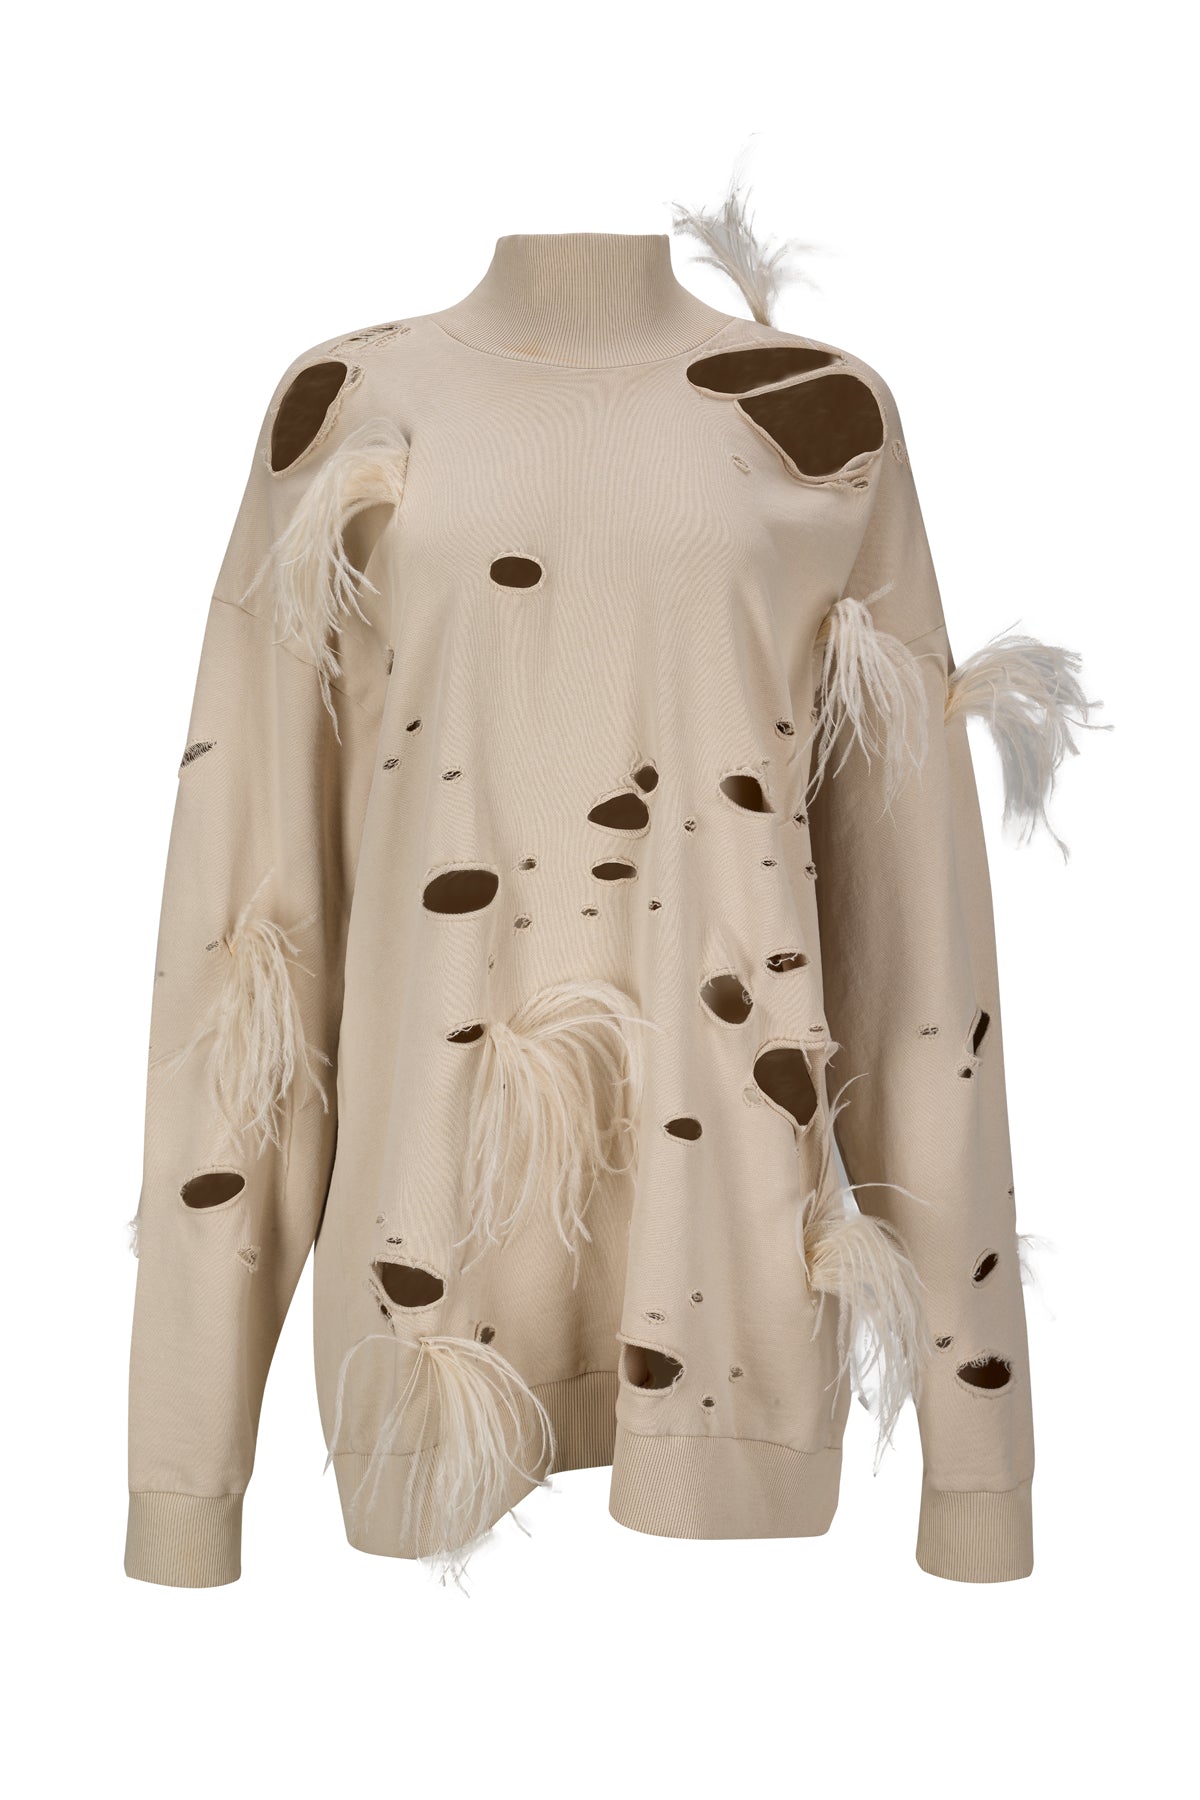 BEIGE DISTRESSED TURTLENECK WITH FEATHERS marques almeida